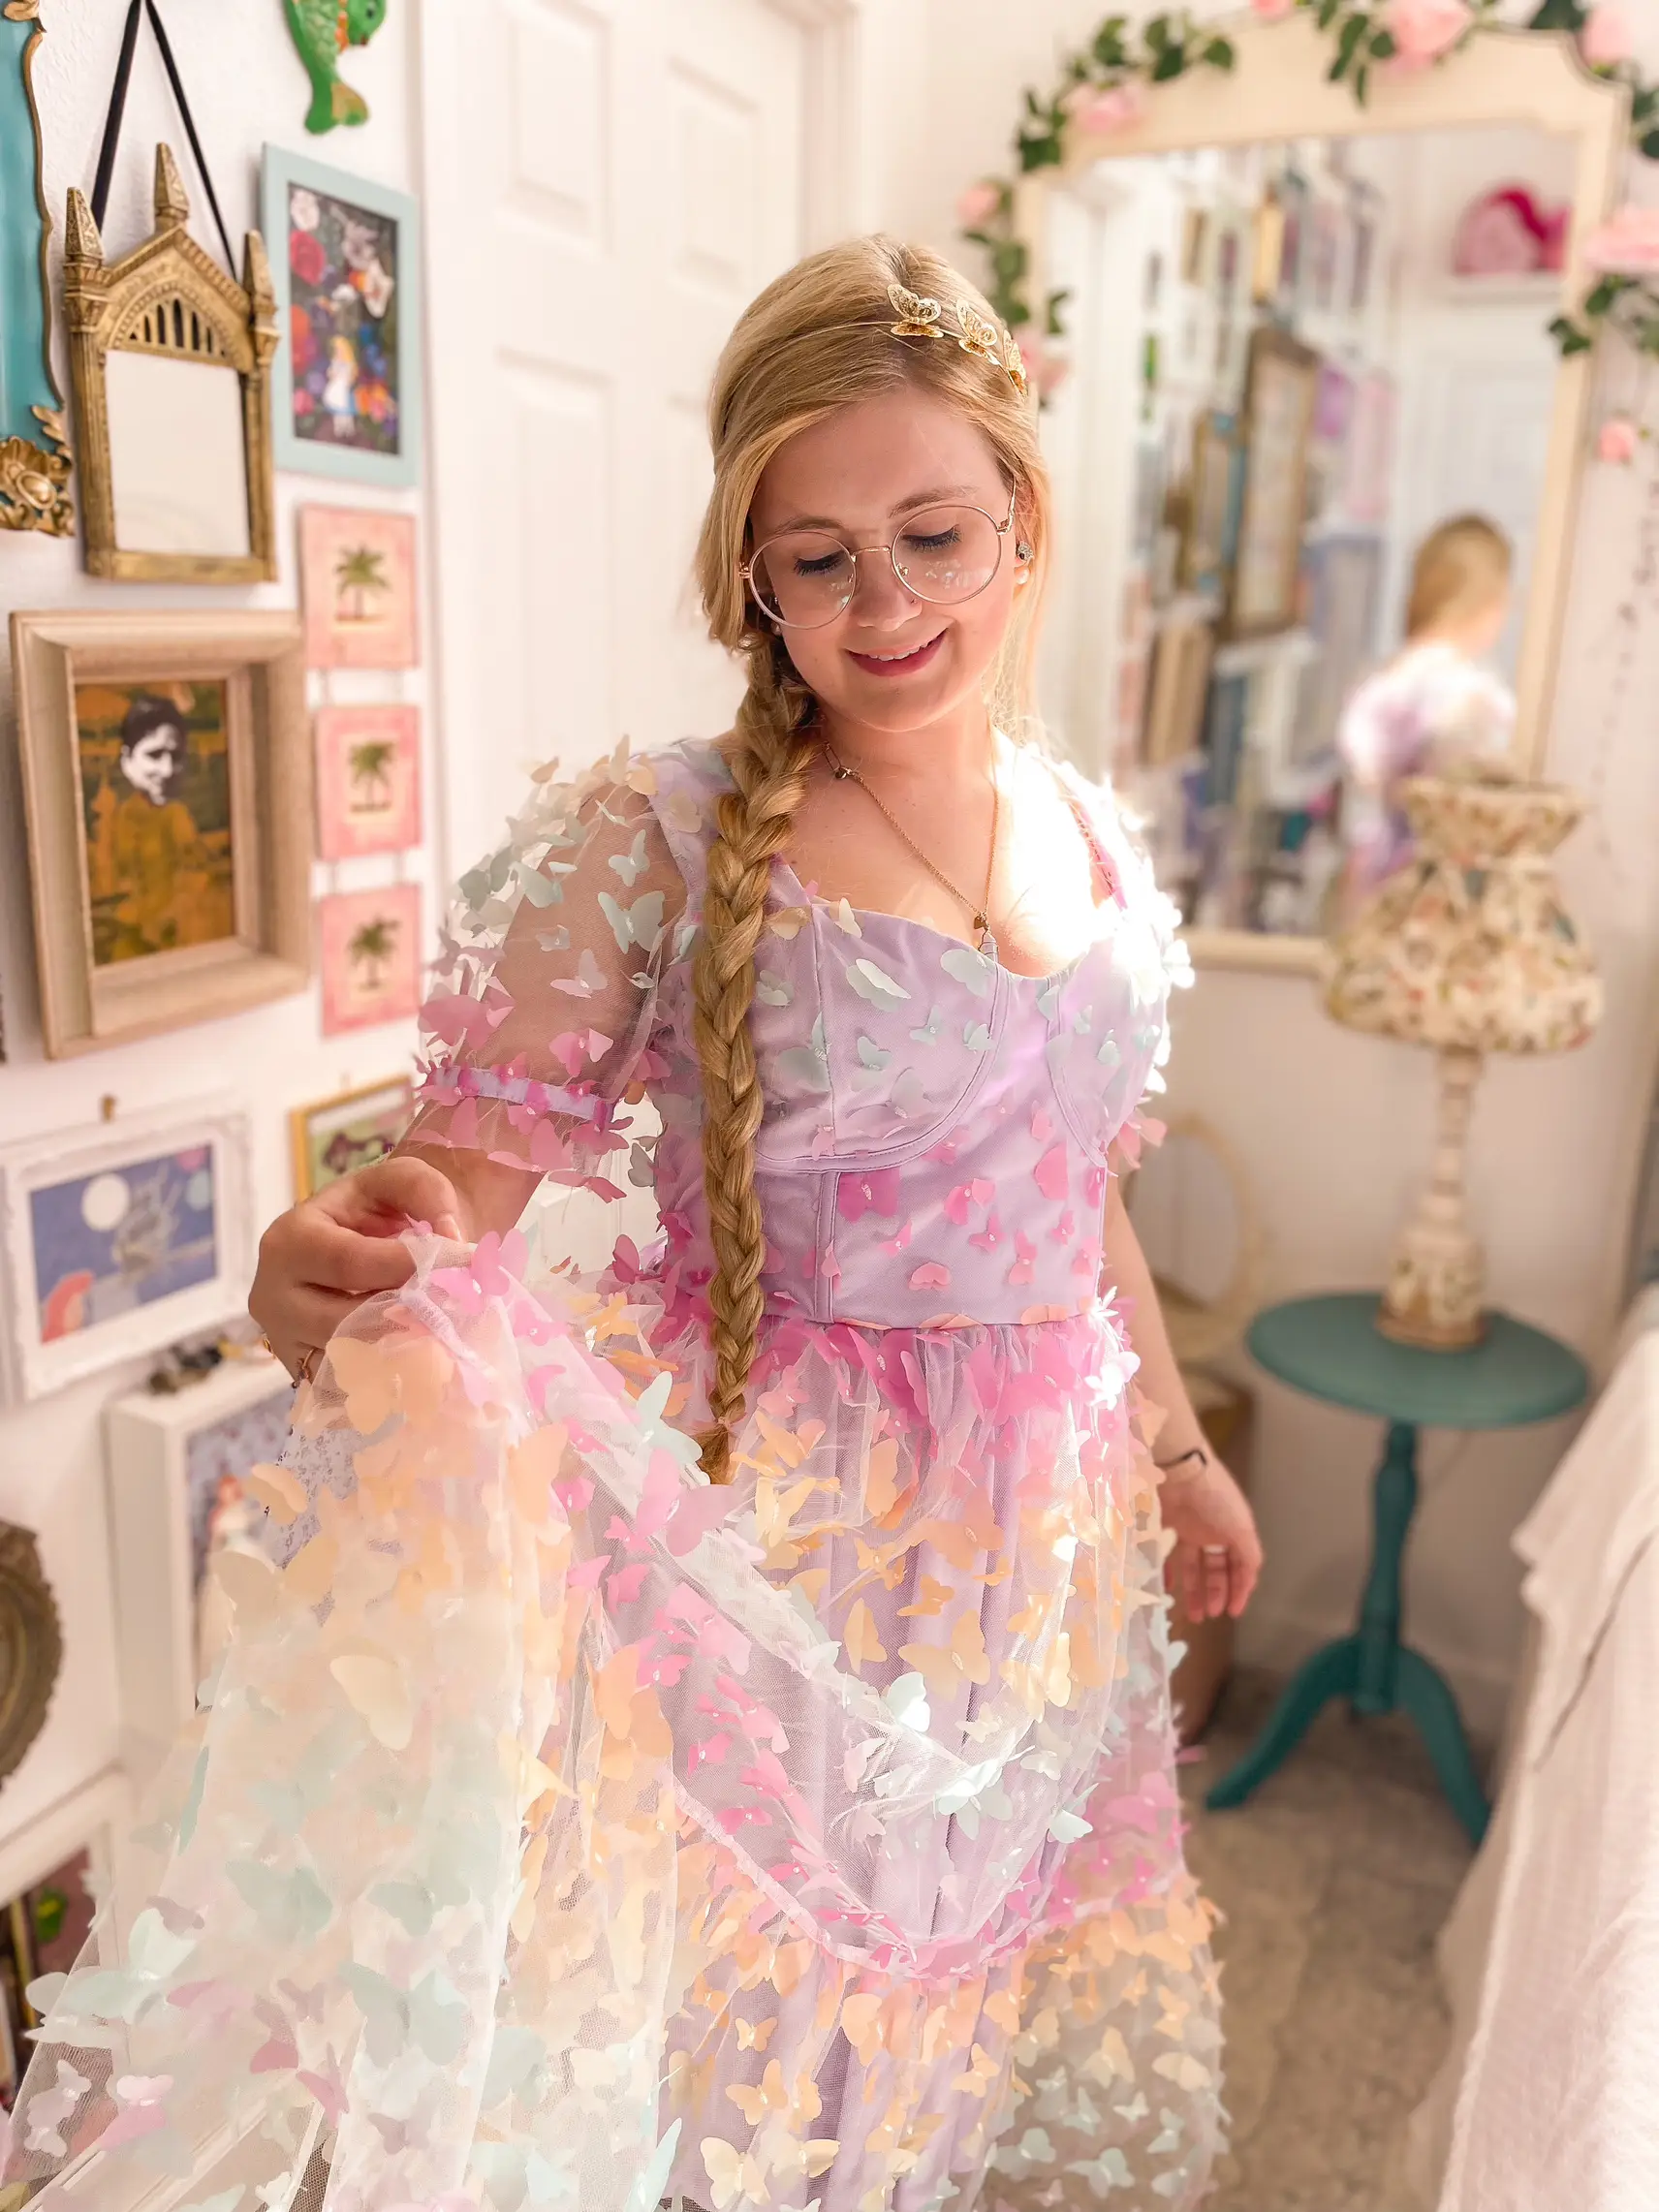 Linked this in my LTK because it's the fairy princess dress of my drea